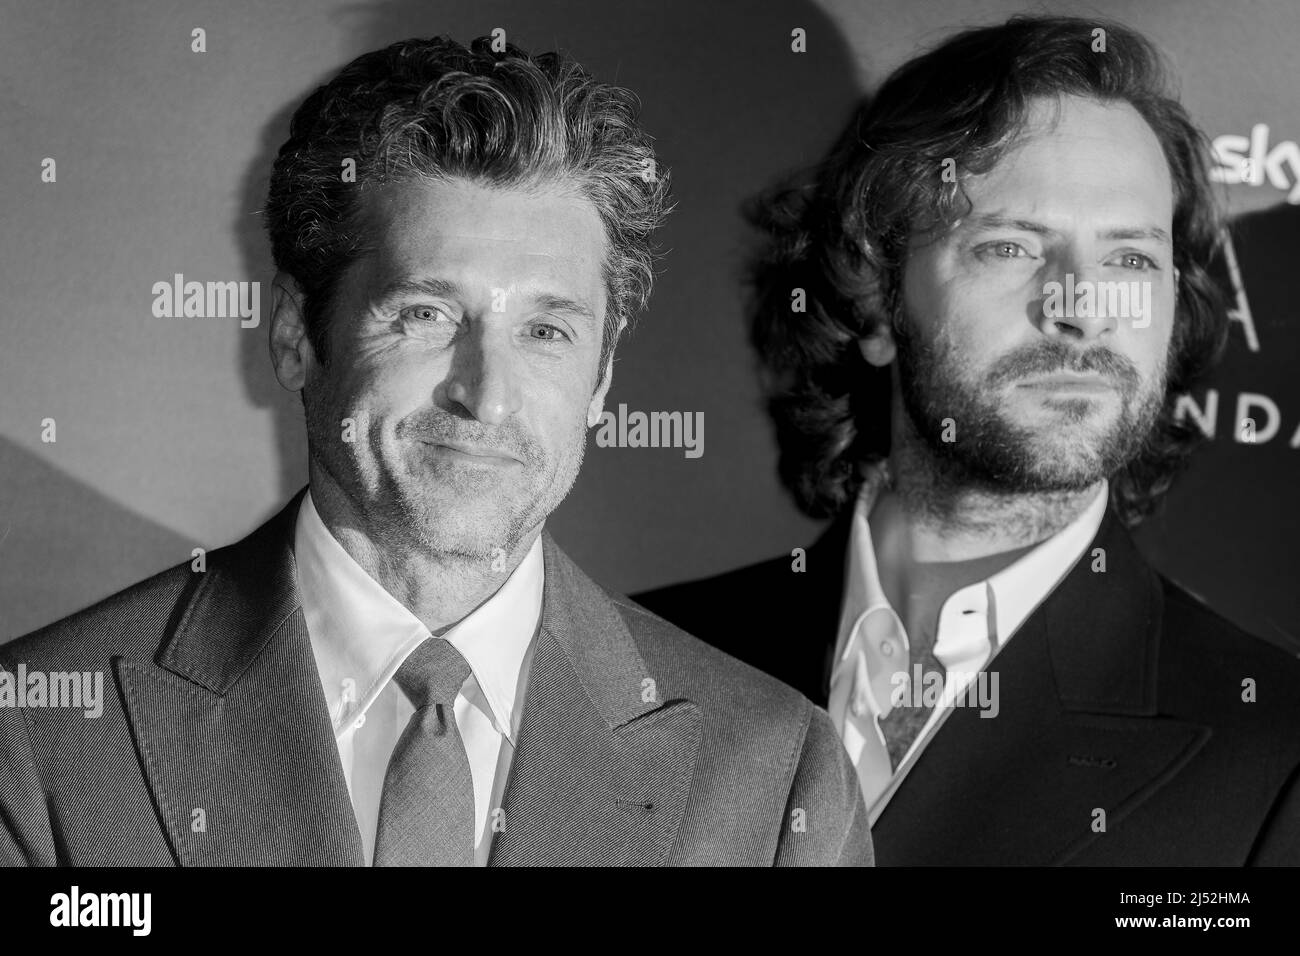 MILAN, ITALY - APRIL 07:  Patrick Dempsey and Alessandro Borghi attend the 'Diavoli' Tv Series Second Season Premiere at The Space Odeon on April 07, Stock Photo